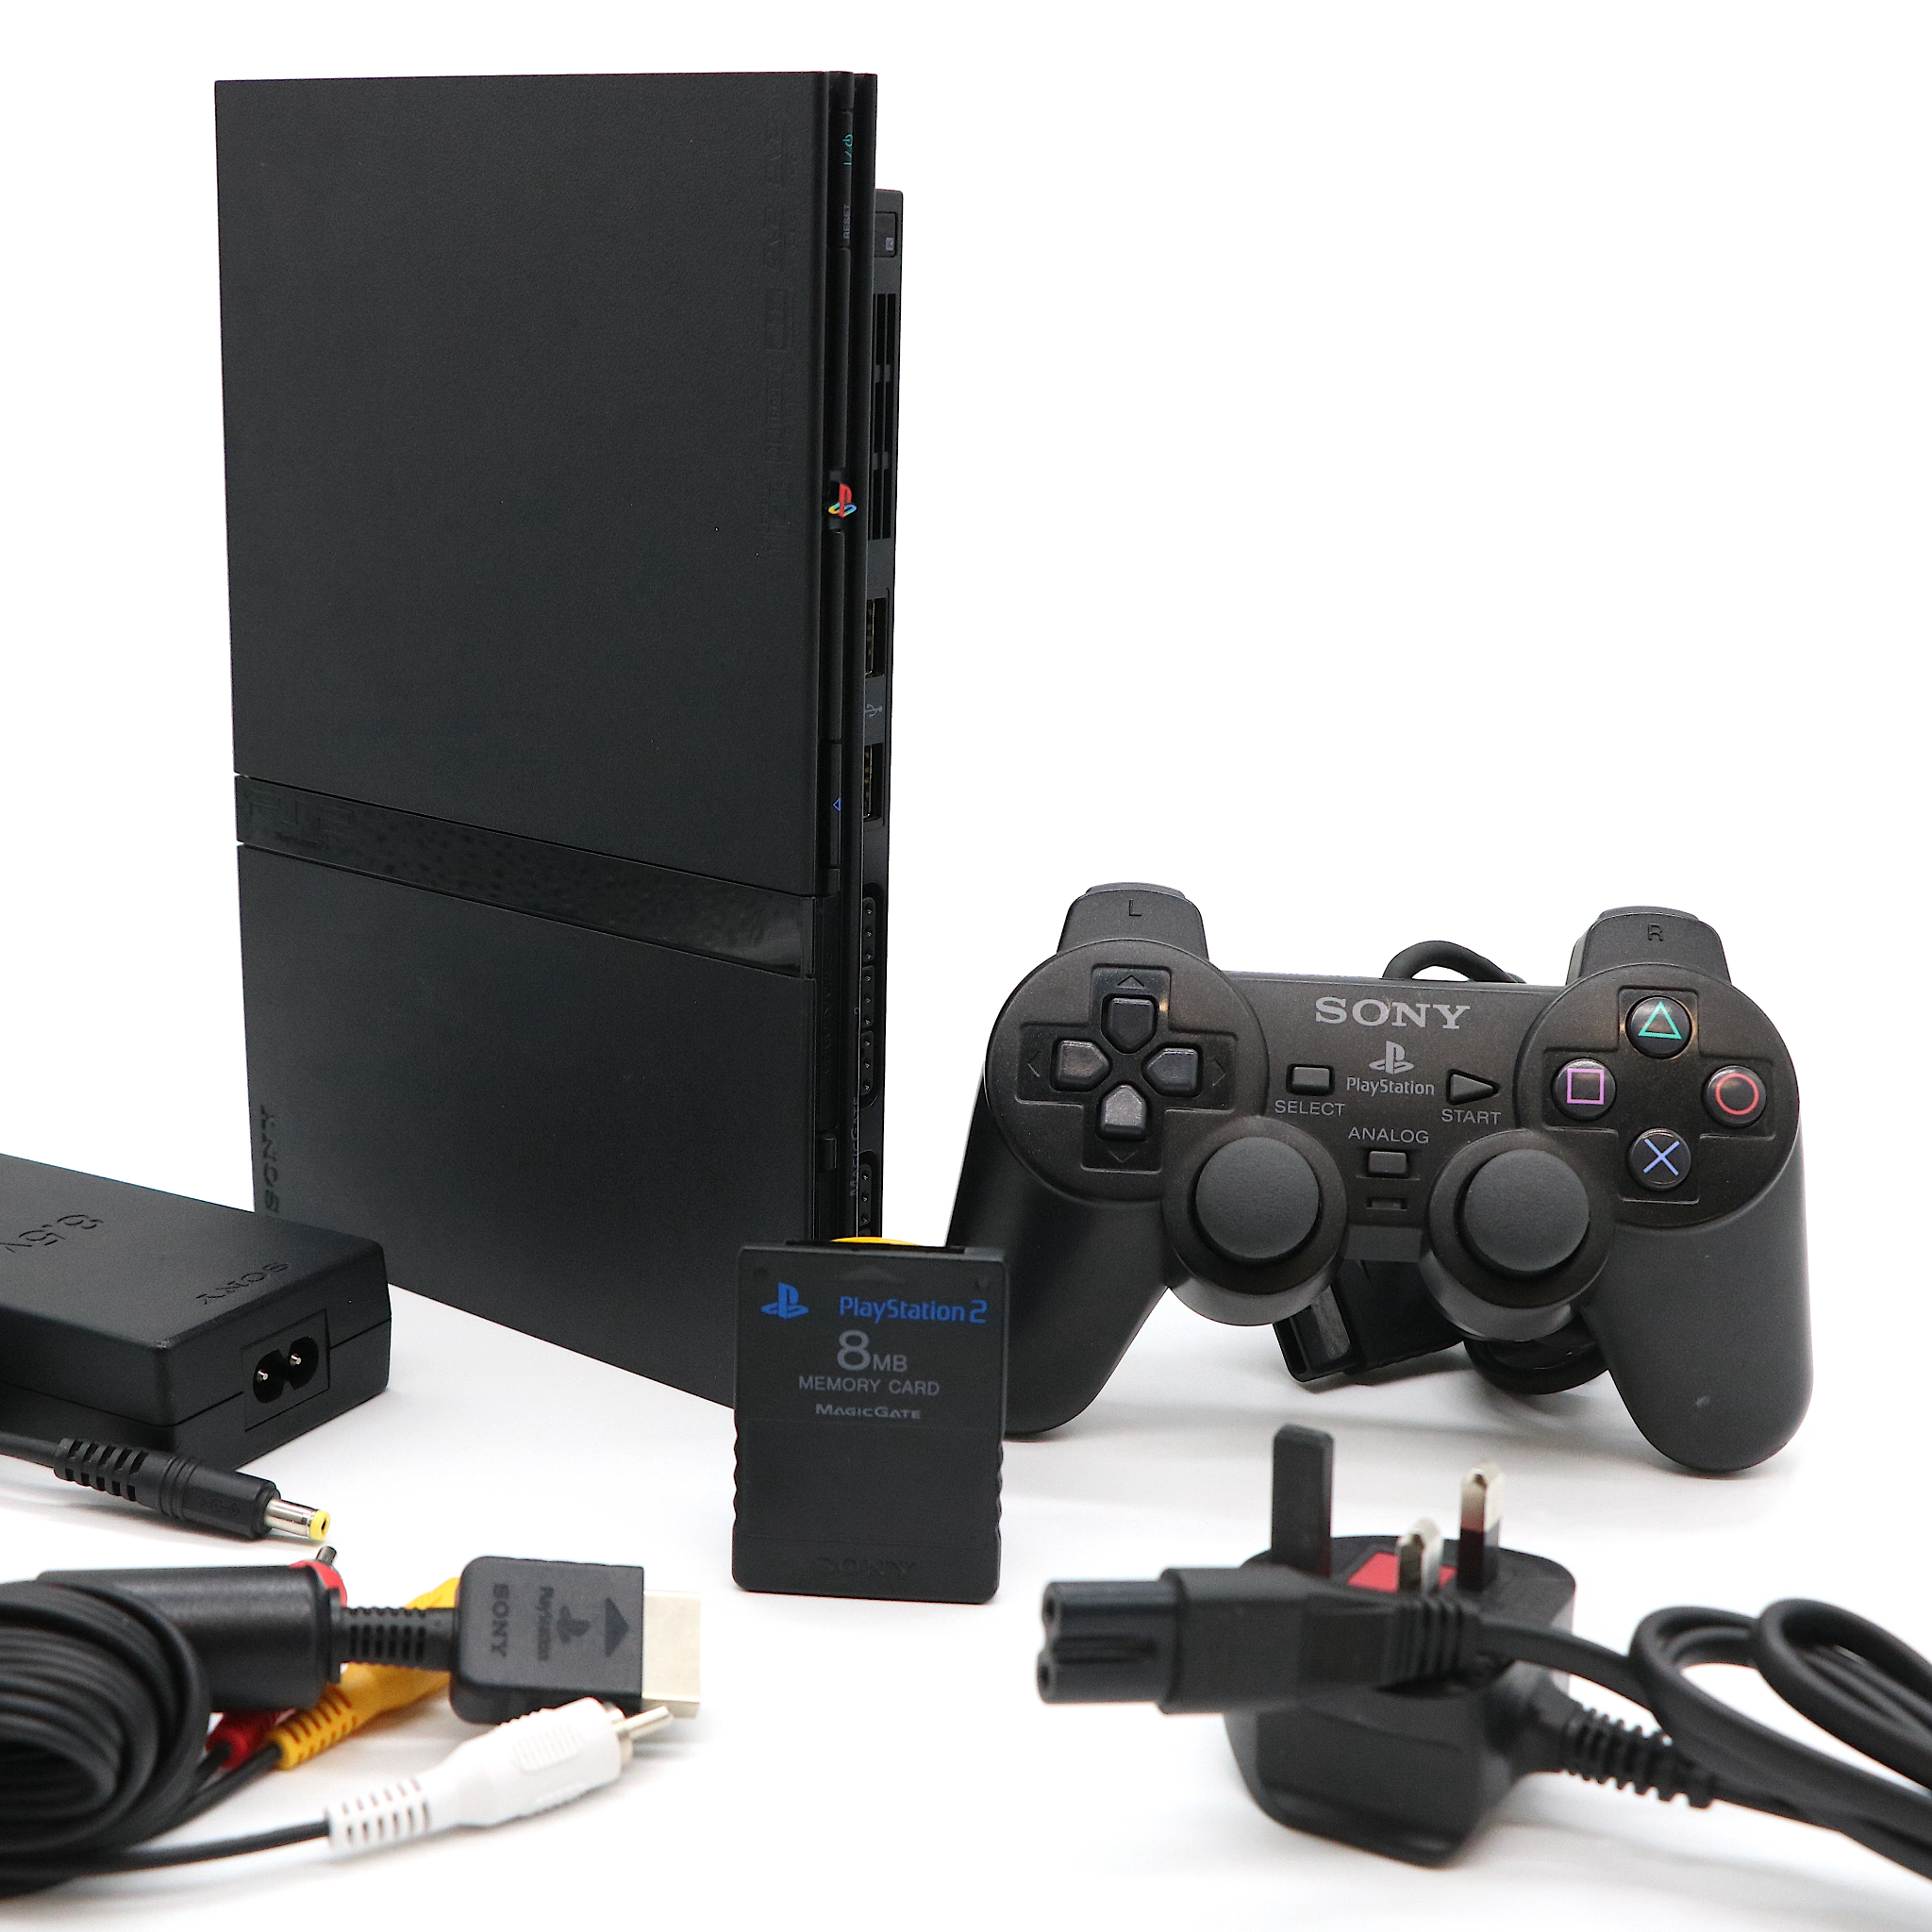 Black Slimline Slim Sony PS2 Console System With Controller & 8MB Card | Grade 2